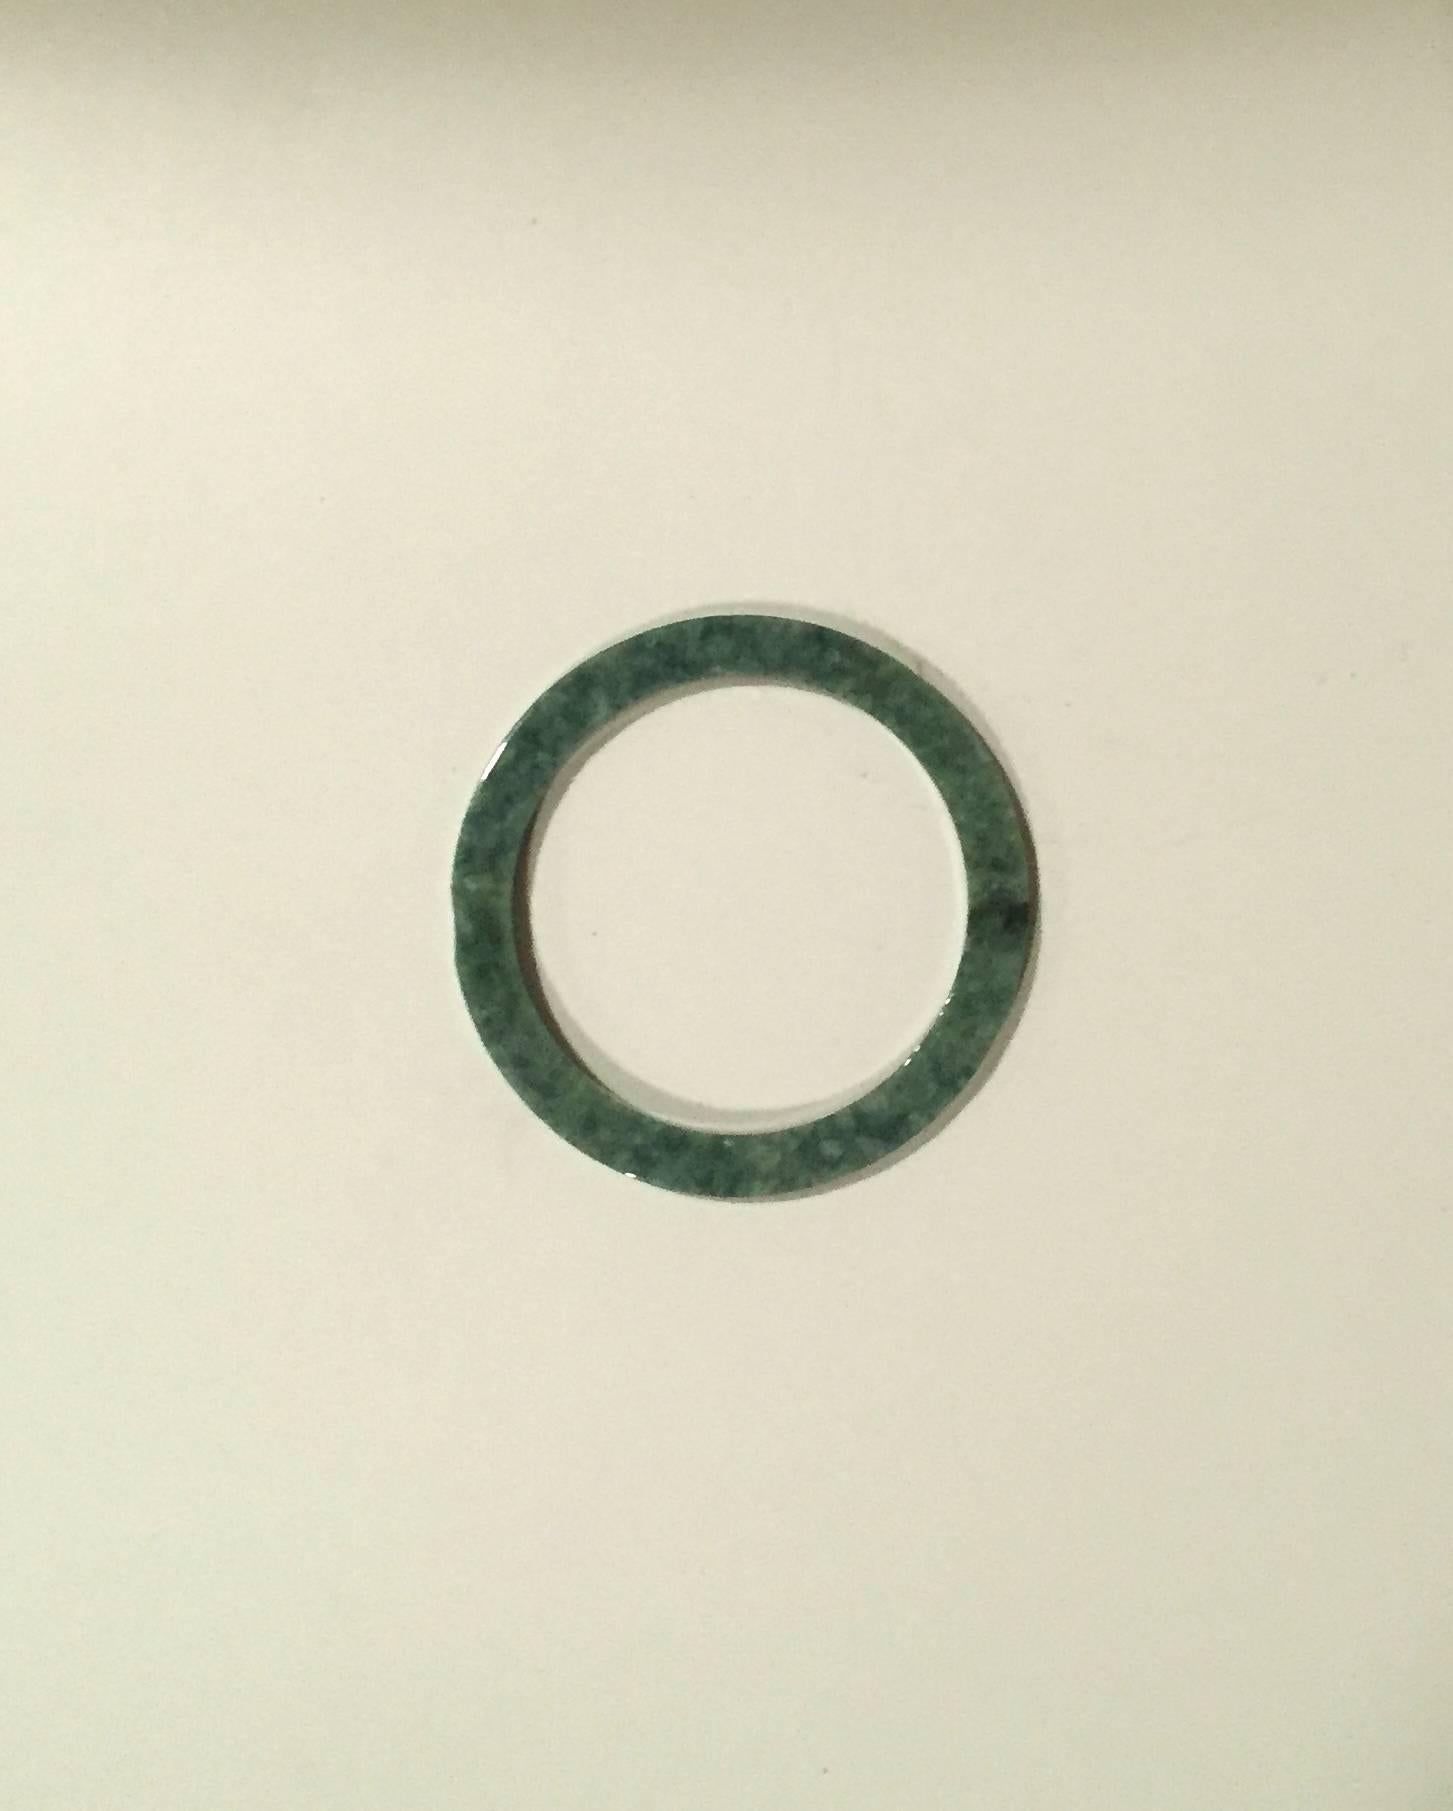 Here is a rare opportunity to acquire some very unique jade items for your interior decorations such as table settings, curtains and others. 

These pieces vary in thickness a bit but they average 1/8th of an inch. The inside diameter is